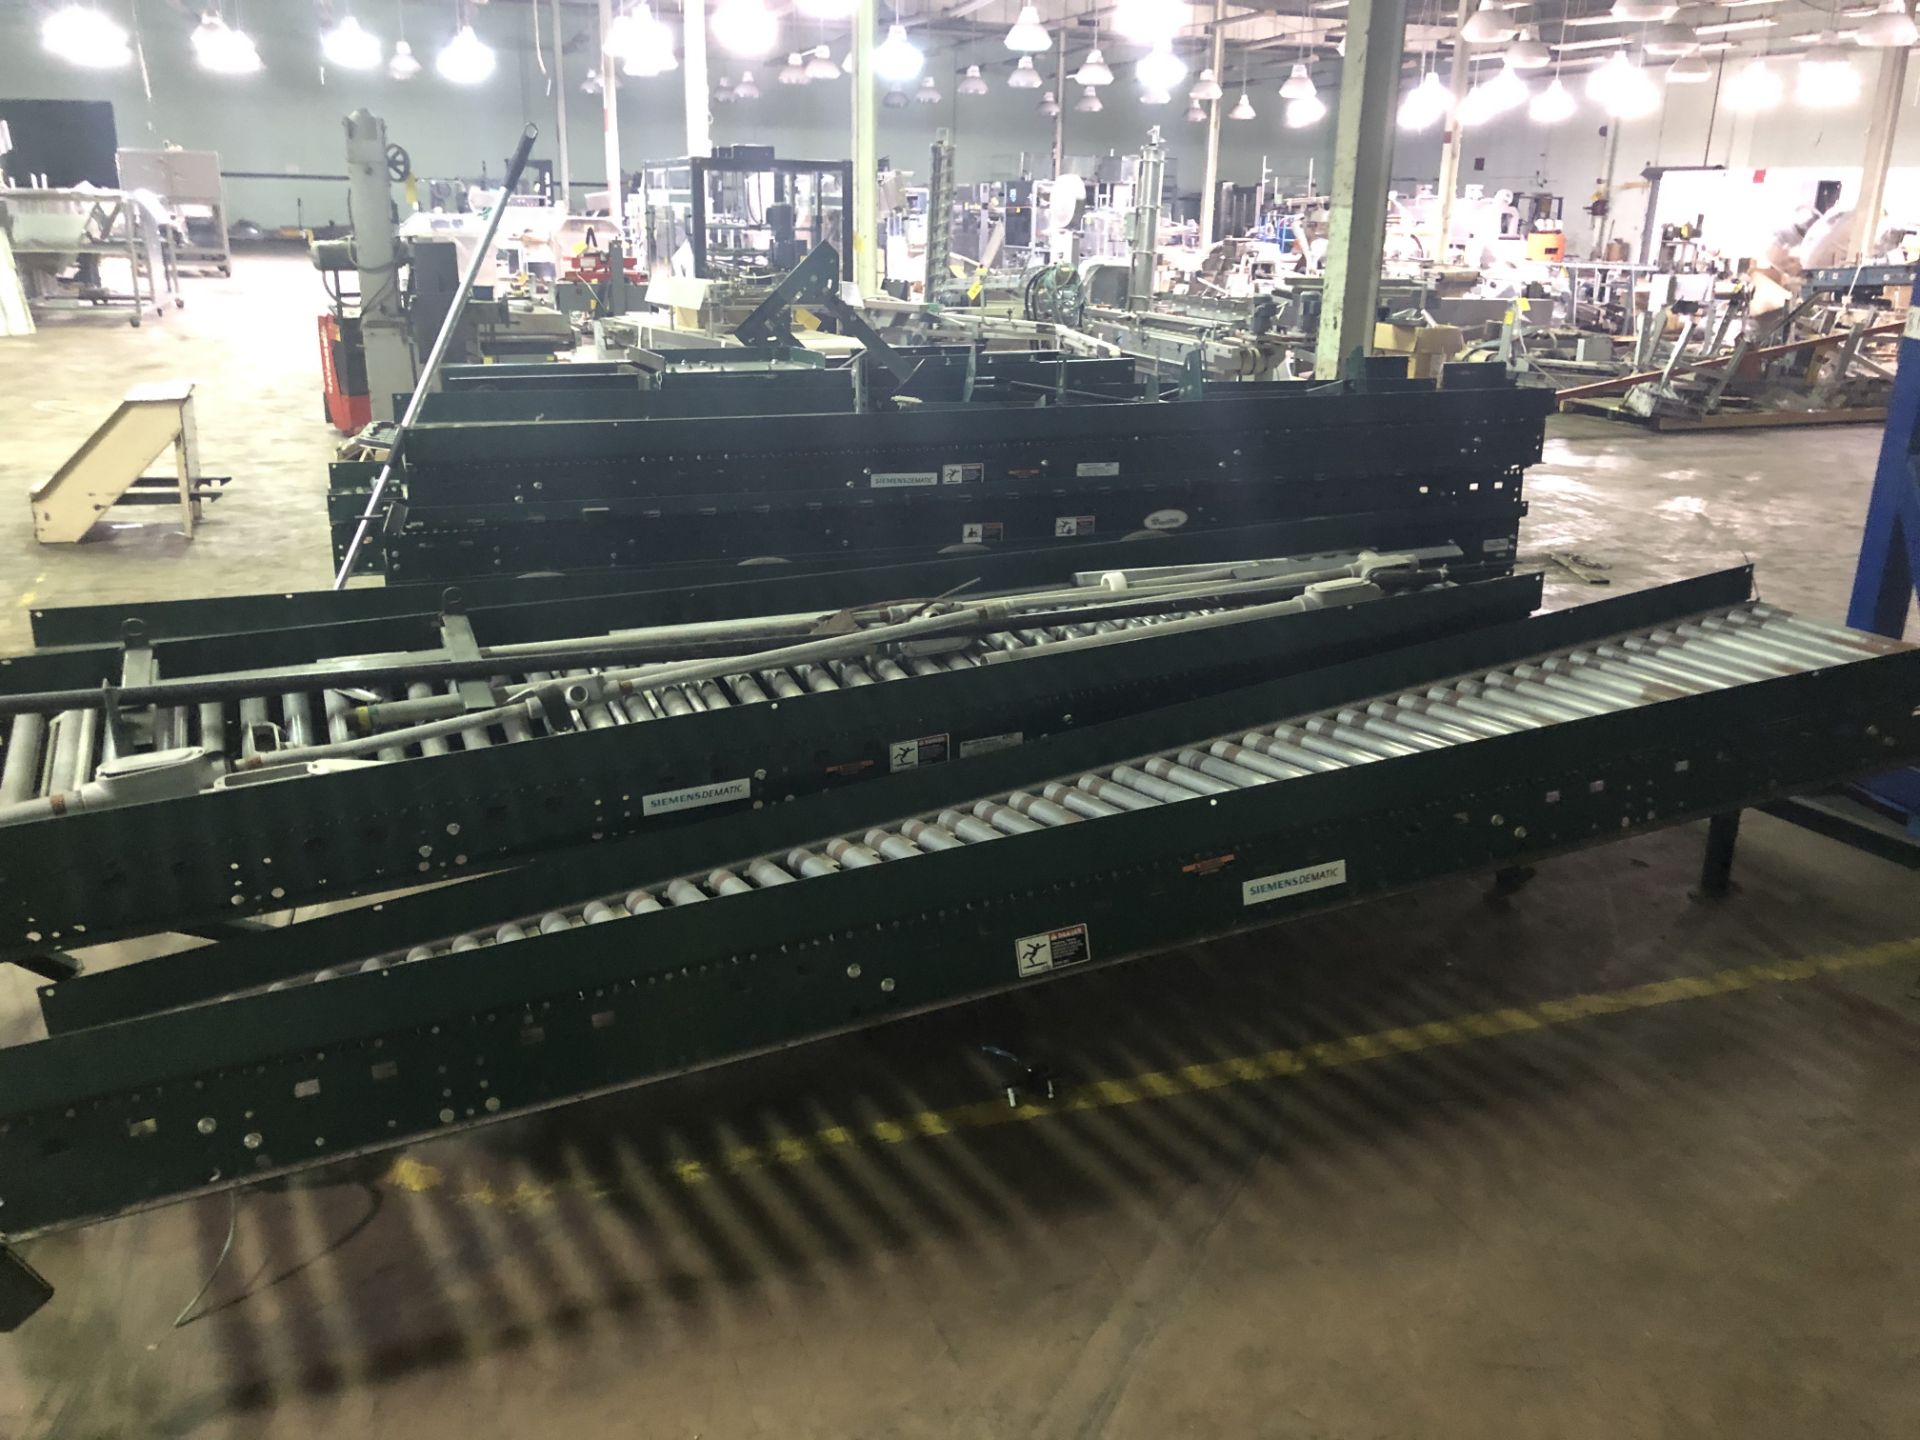 Siemens Dematic Motorized Roller Conveyor, Approximate (7) 10' Sections, RIGGING FEE - $800 - Image 3 of 3